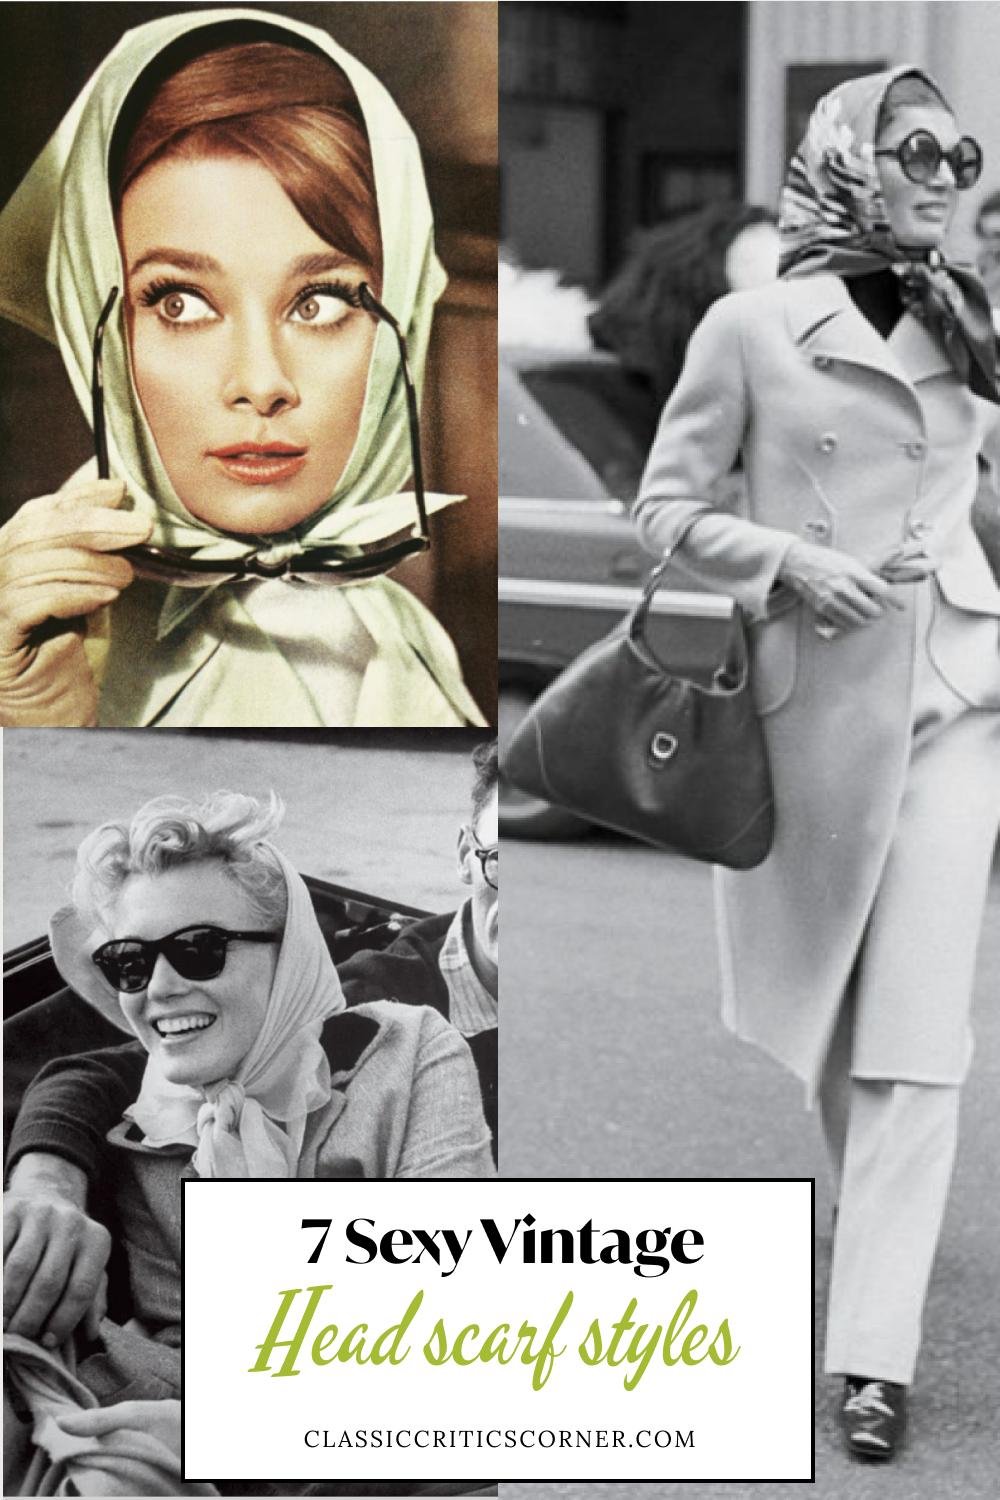 7 Vintage Scarf Styles — Classic Critics Corner - Vintage Fashion  Inspiration including 1940s Fashion, 1950s Fashion and Old Hollywood Glam  icons like Grace Kelly, Audrey Hepburn and Marilyn Monroe.